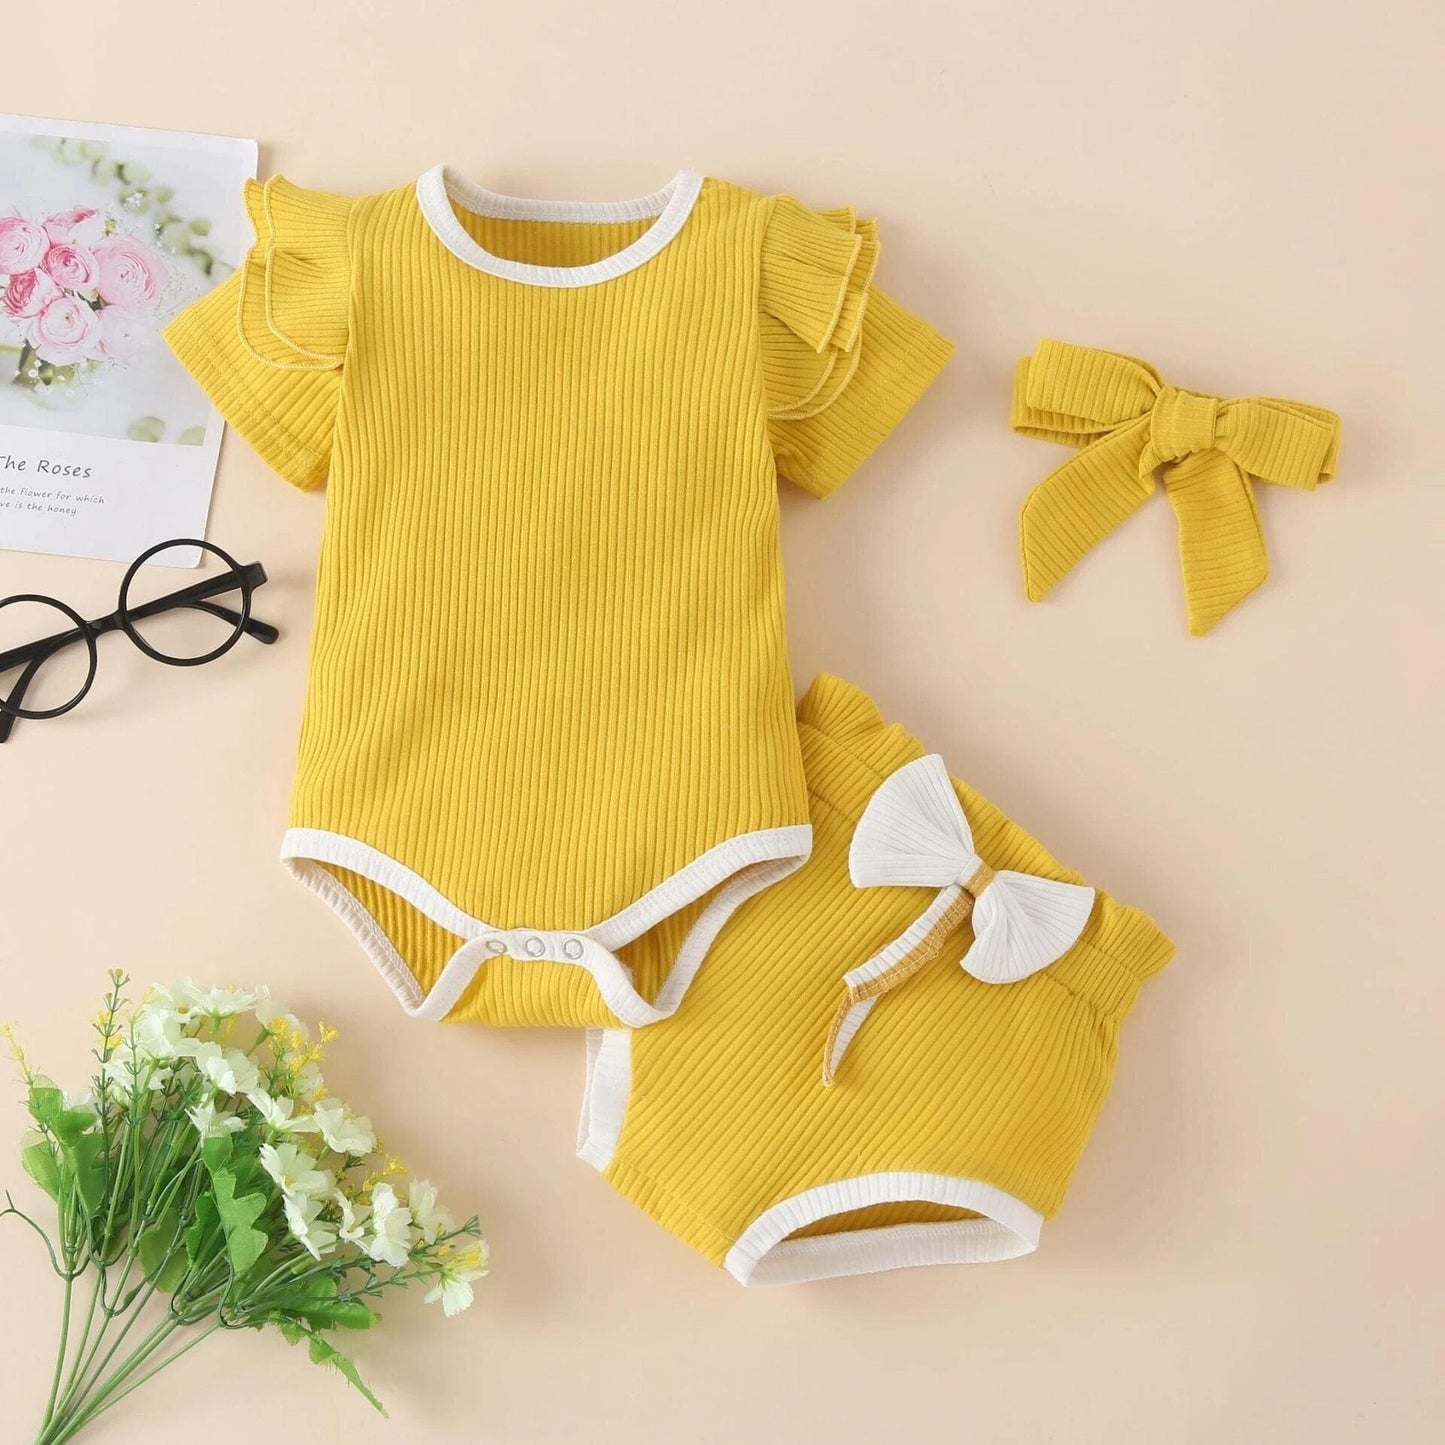 Autumn and winter foreign trade children's clothing solid color pit striped cotton long-sleeved romper with bowknot trousers three-piece suit